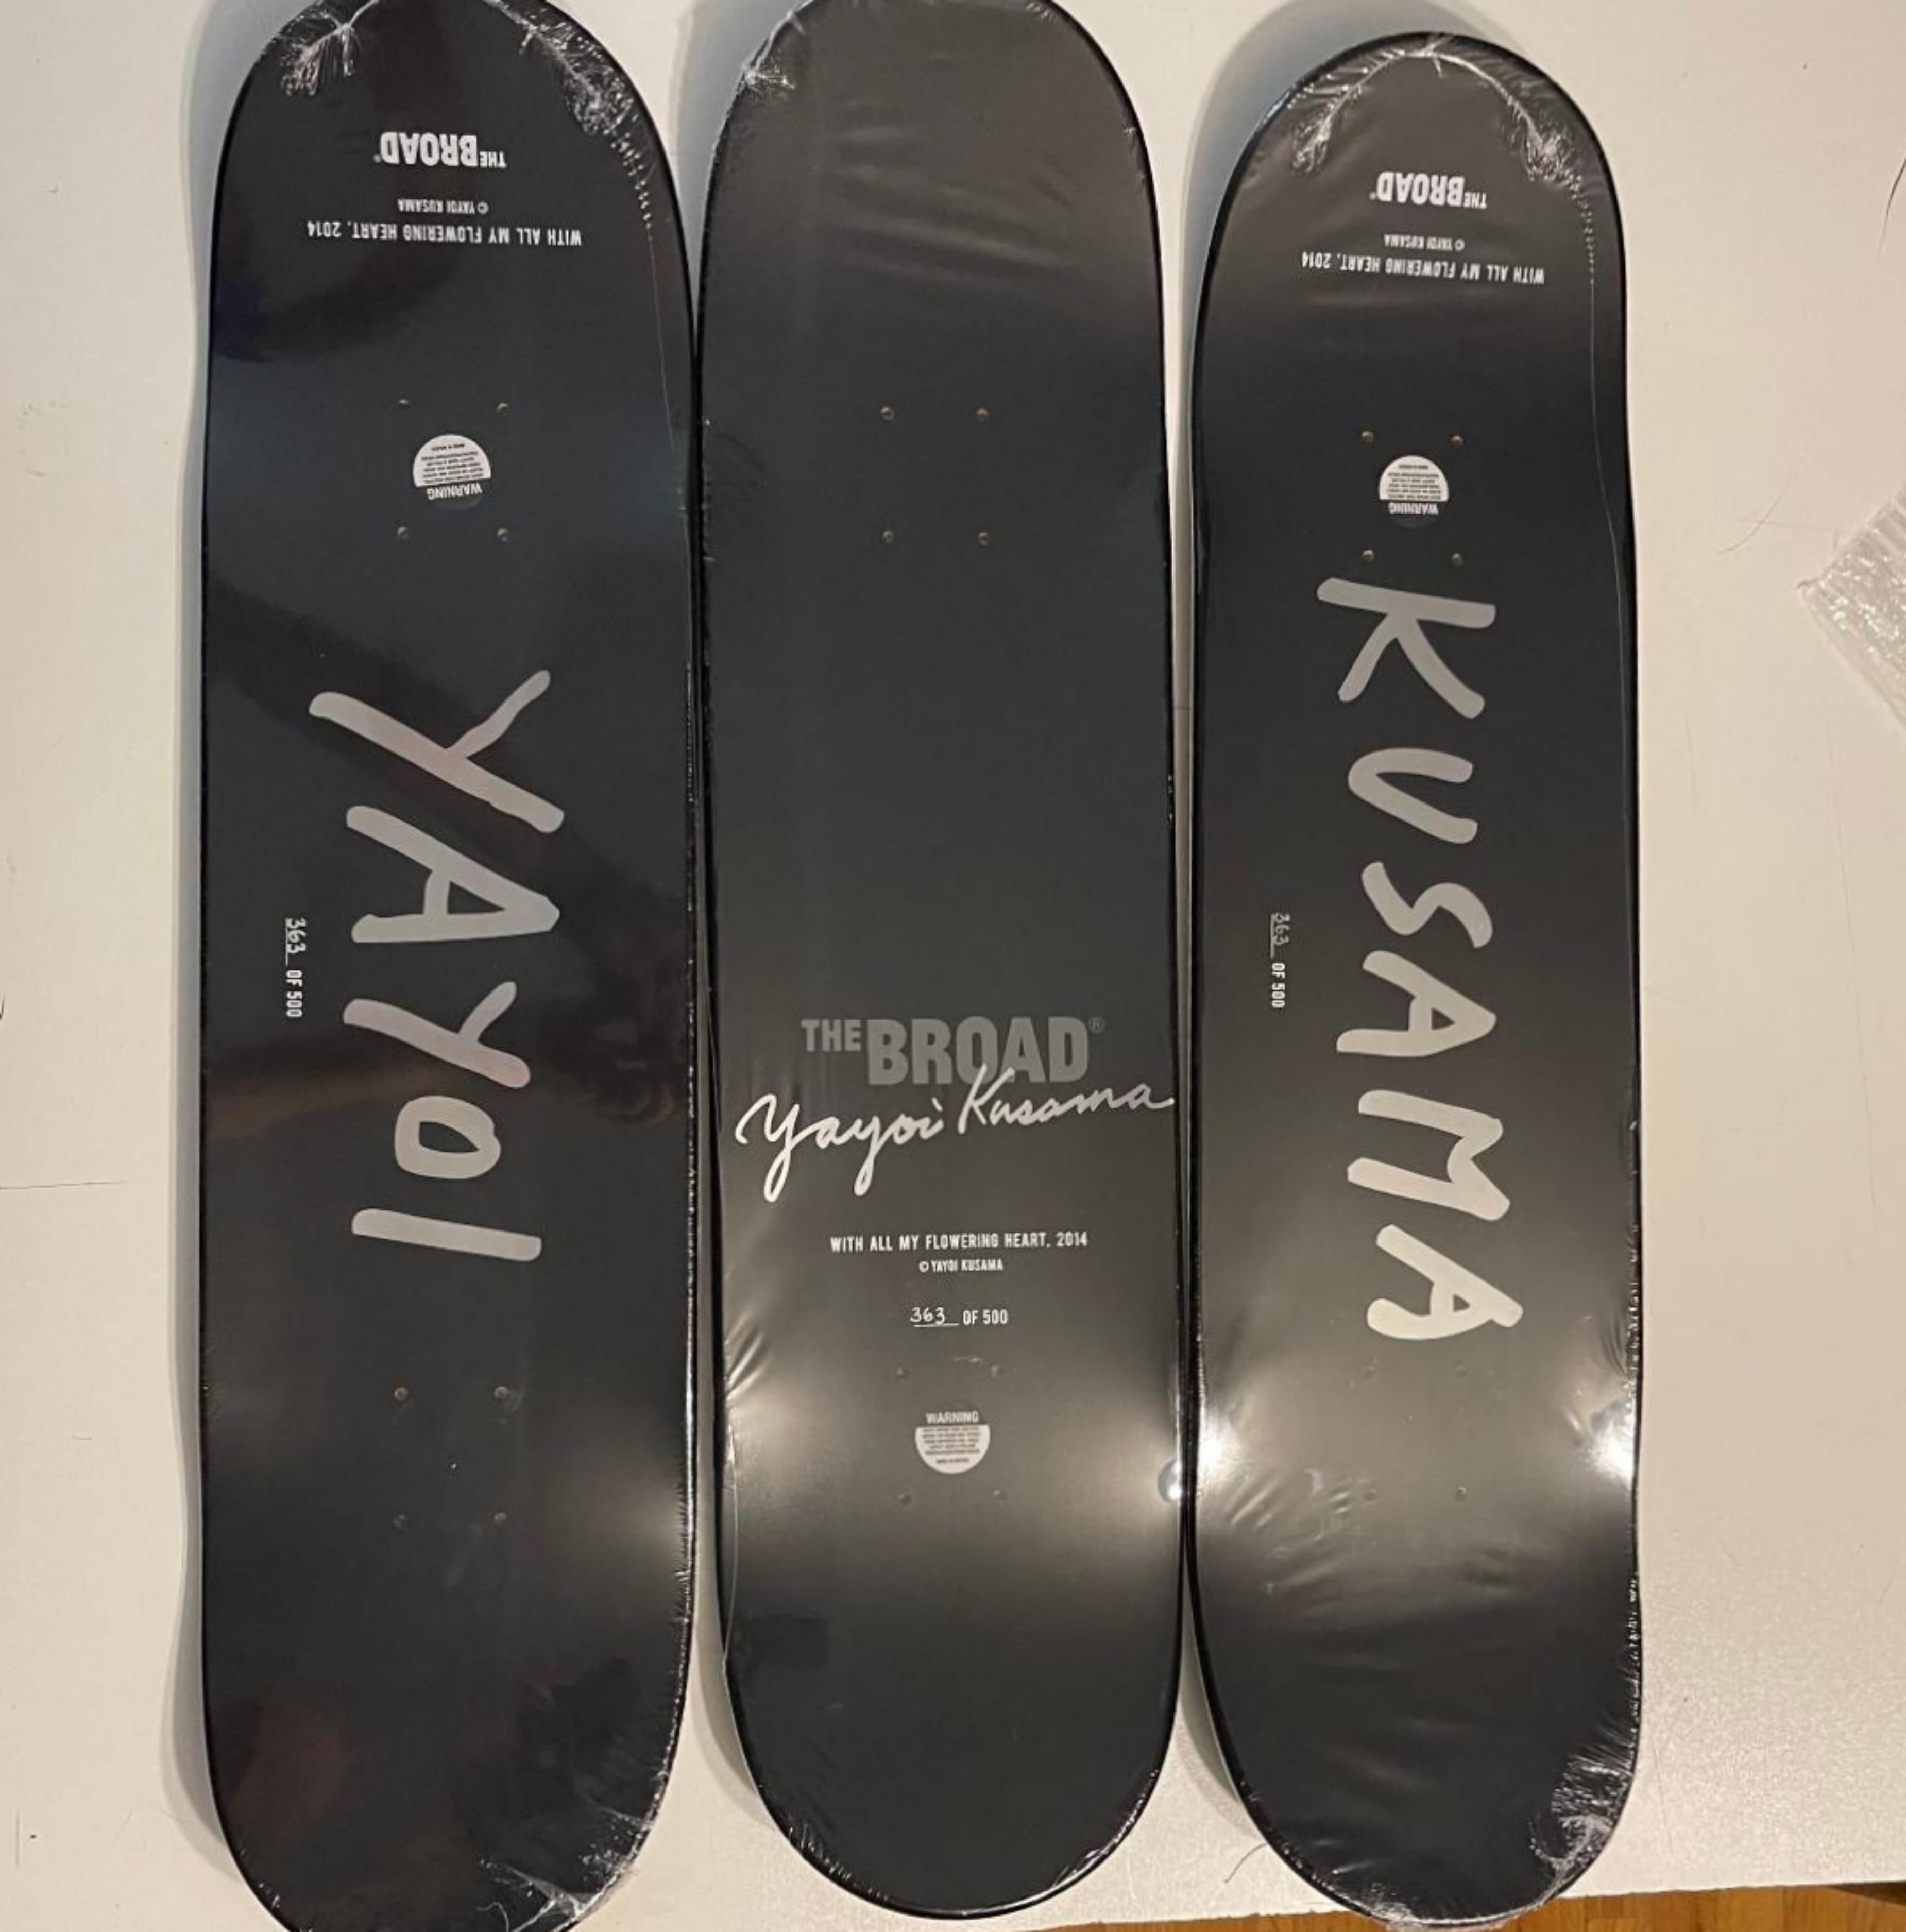 Yayoi Kusama
With All My Flowering Heart (Triptych), 2014
Set of Three (3) Separate Limited Edition numbered skate decks on 7-ply Canadian maple wood
31 × 8 × 2/5 inches (each)
Hand numbered 429/500
Authorized printed (plate) signature; individually